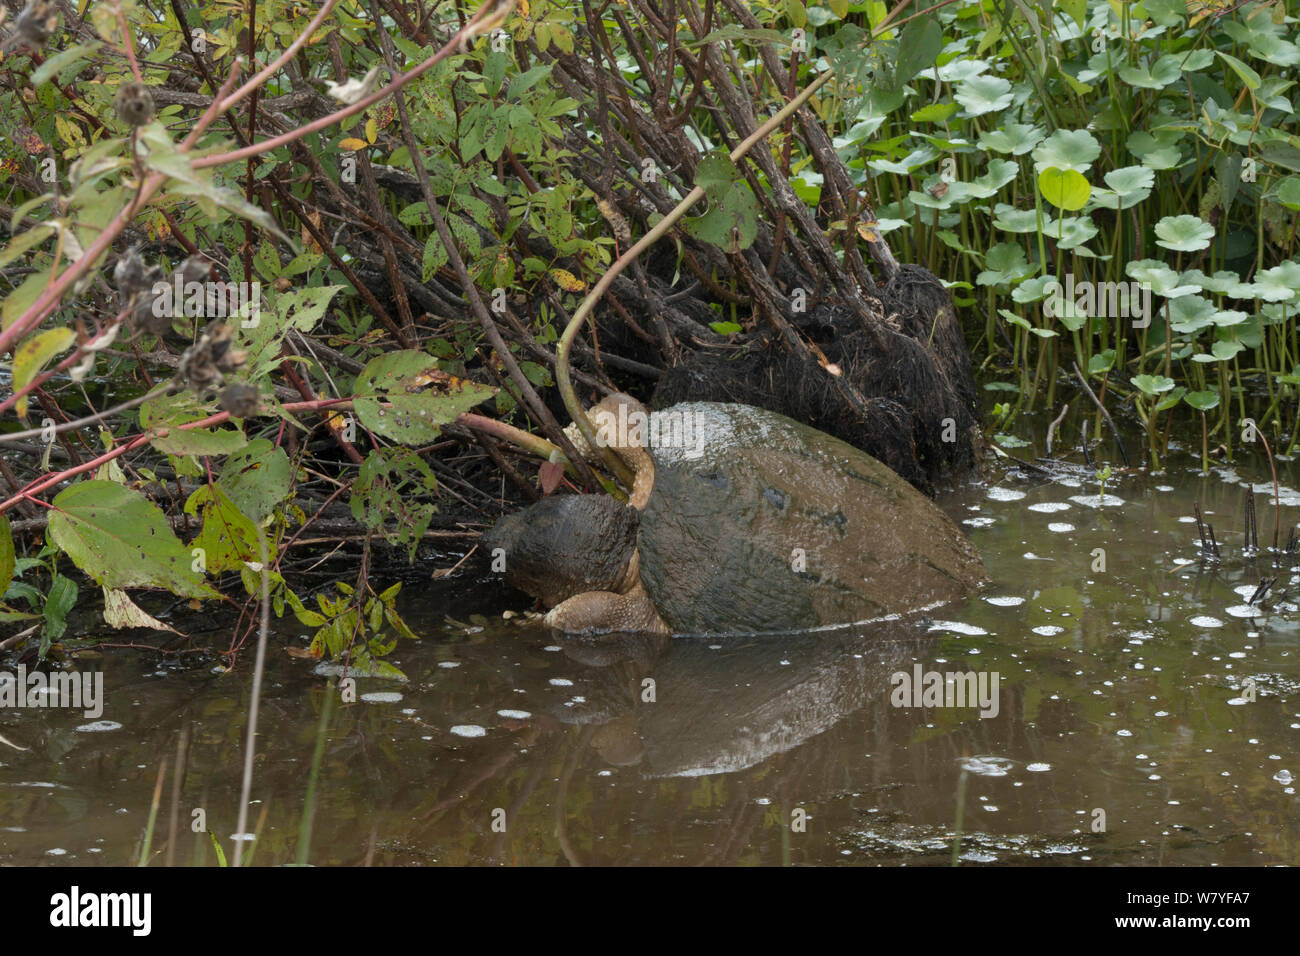 Snapping turtle (Chelydra serpentina) climbing out of water, Virginia, USA, September. Stock Photo